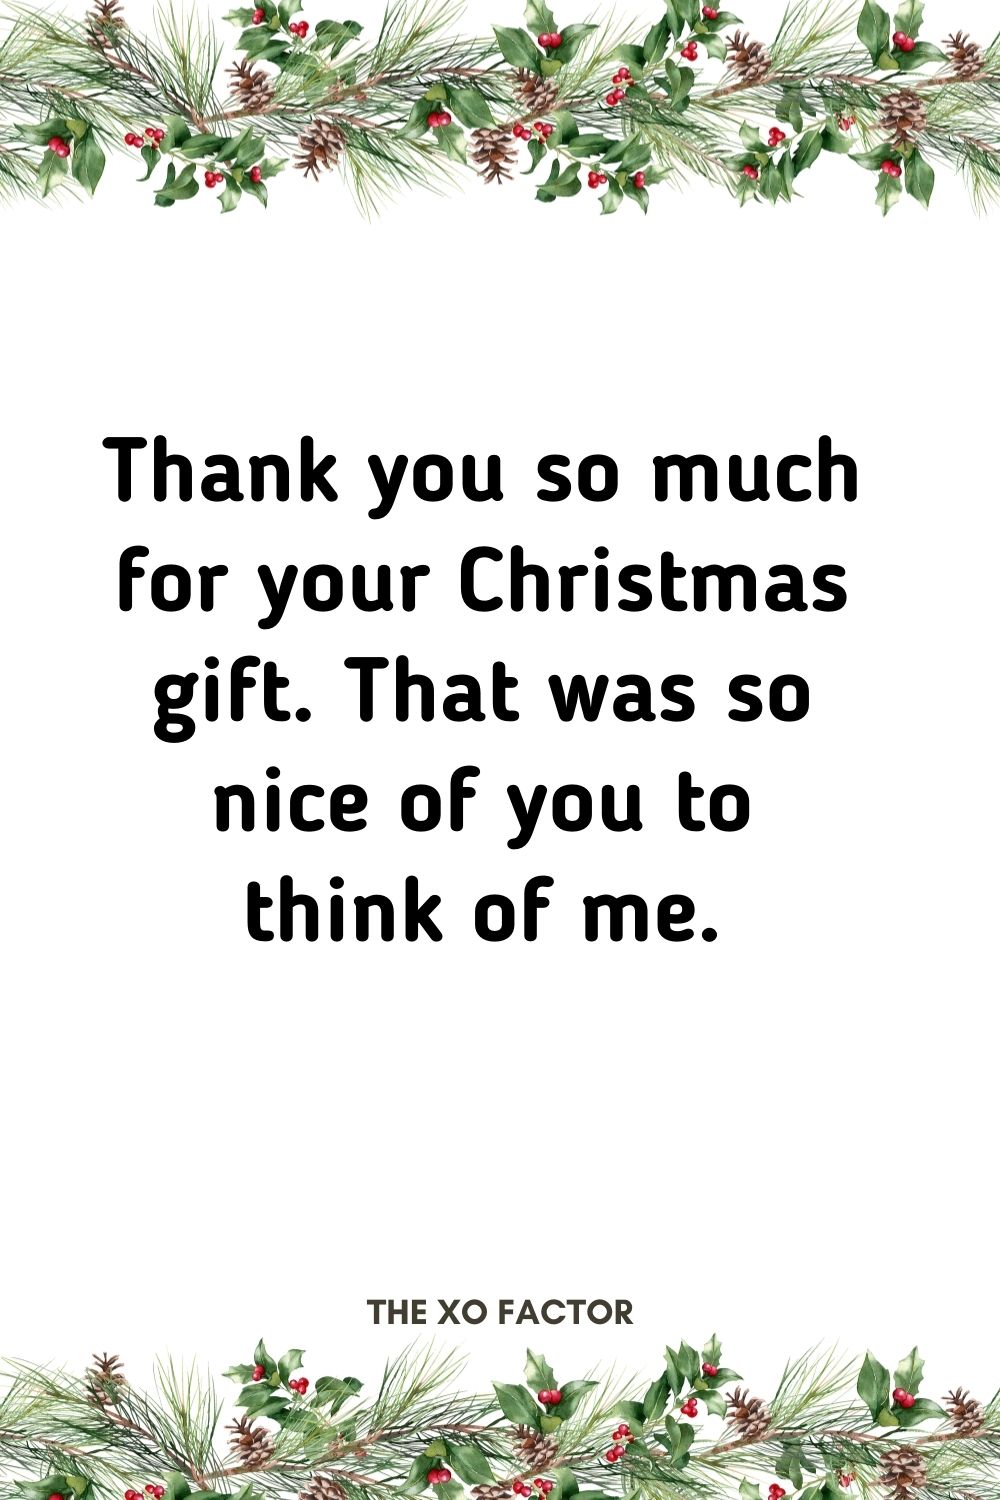 Thank you so much for your Christmas gift. That was so nice of you to think of me.